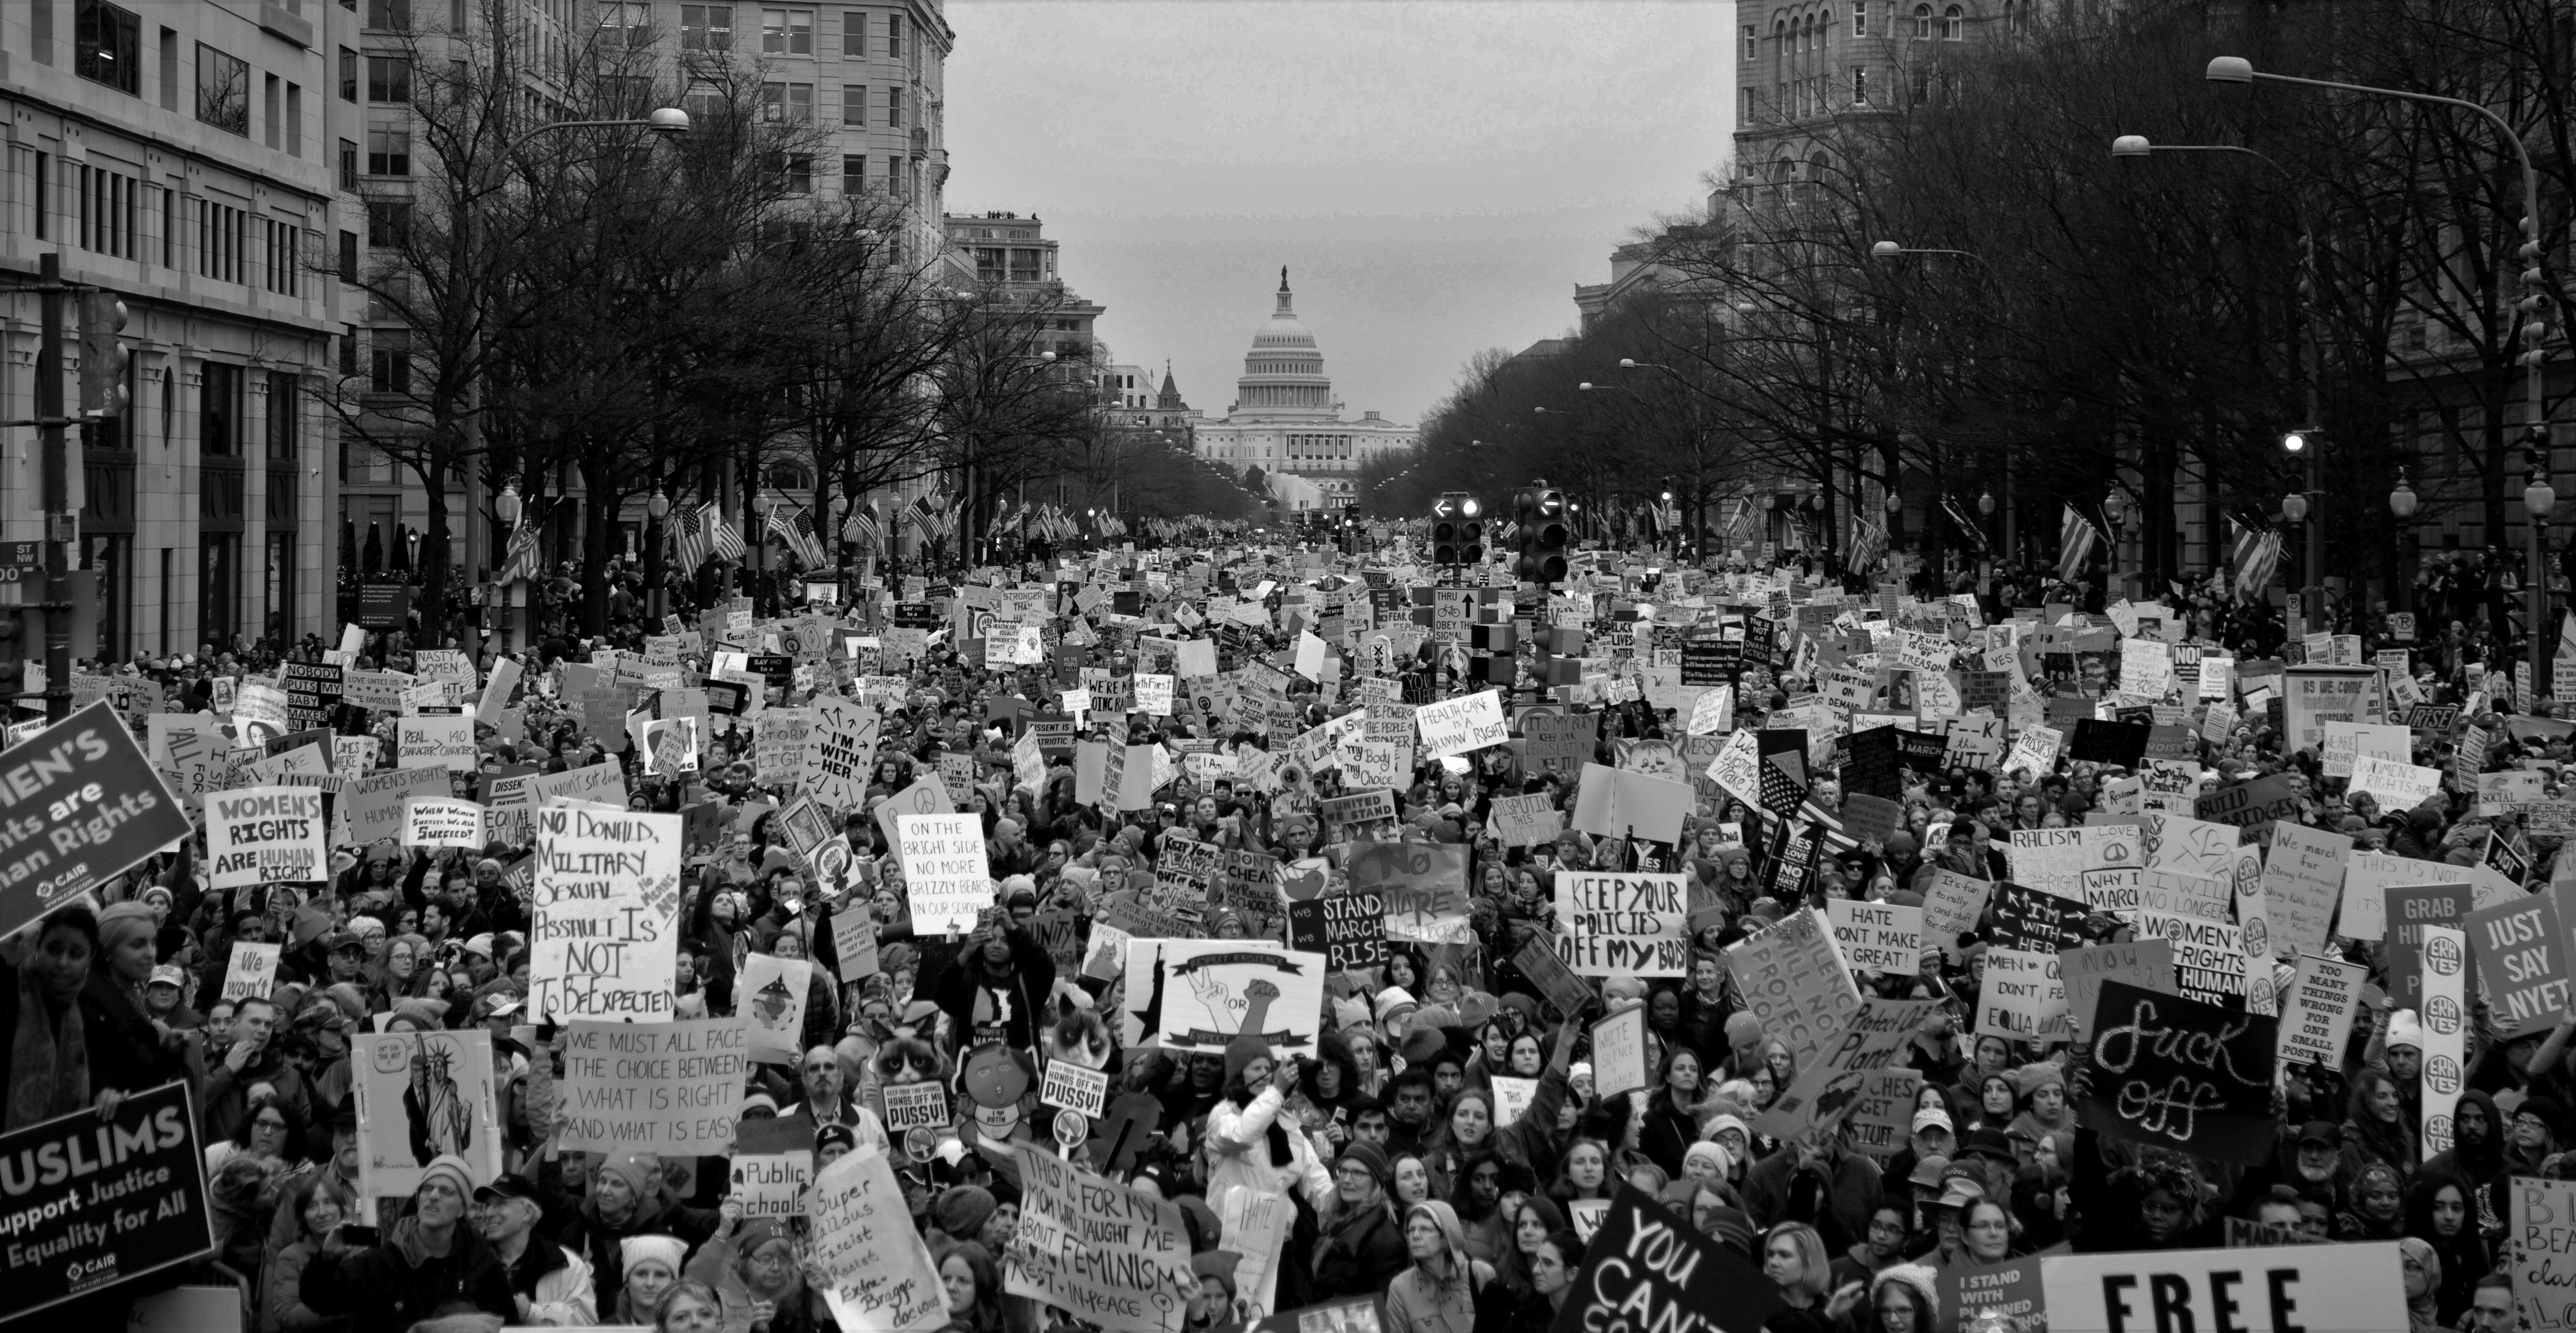 Remembering the Women’s March